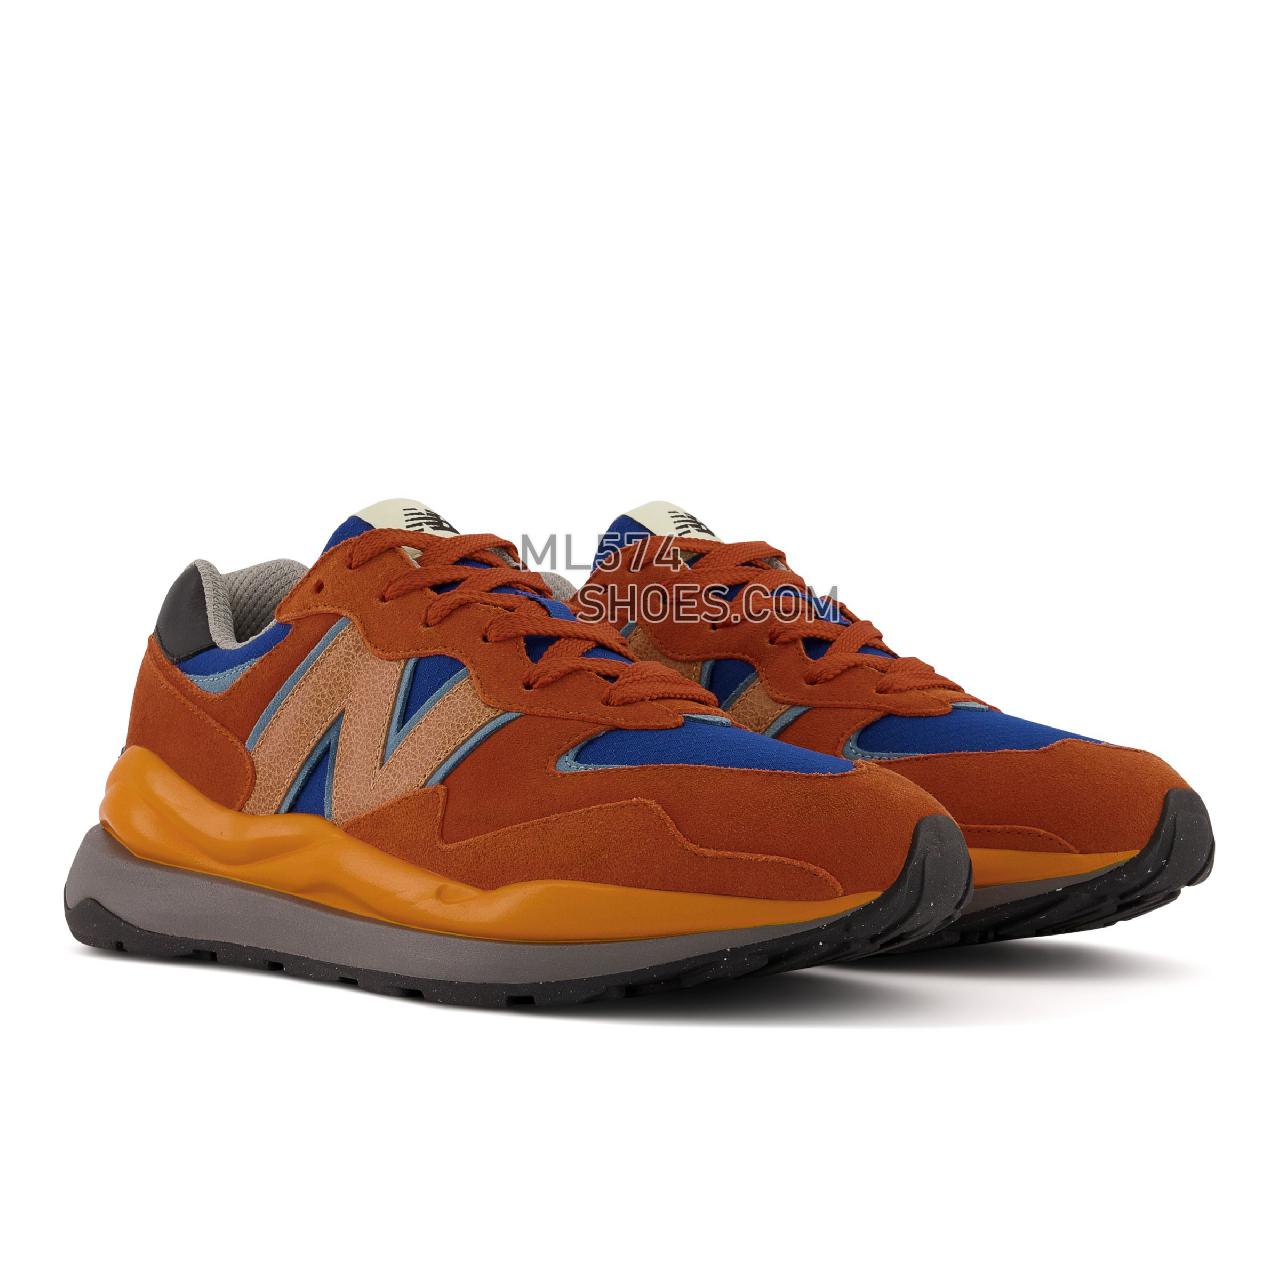 New Balance 57/40 - Men's Sport Style Sneakers - Rust Oxide with Blue Groove - M5740GHA